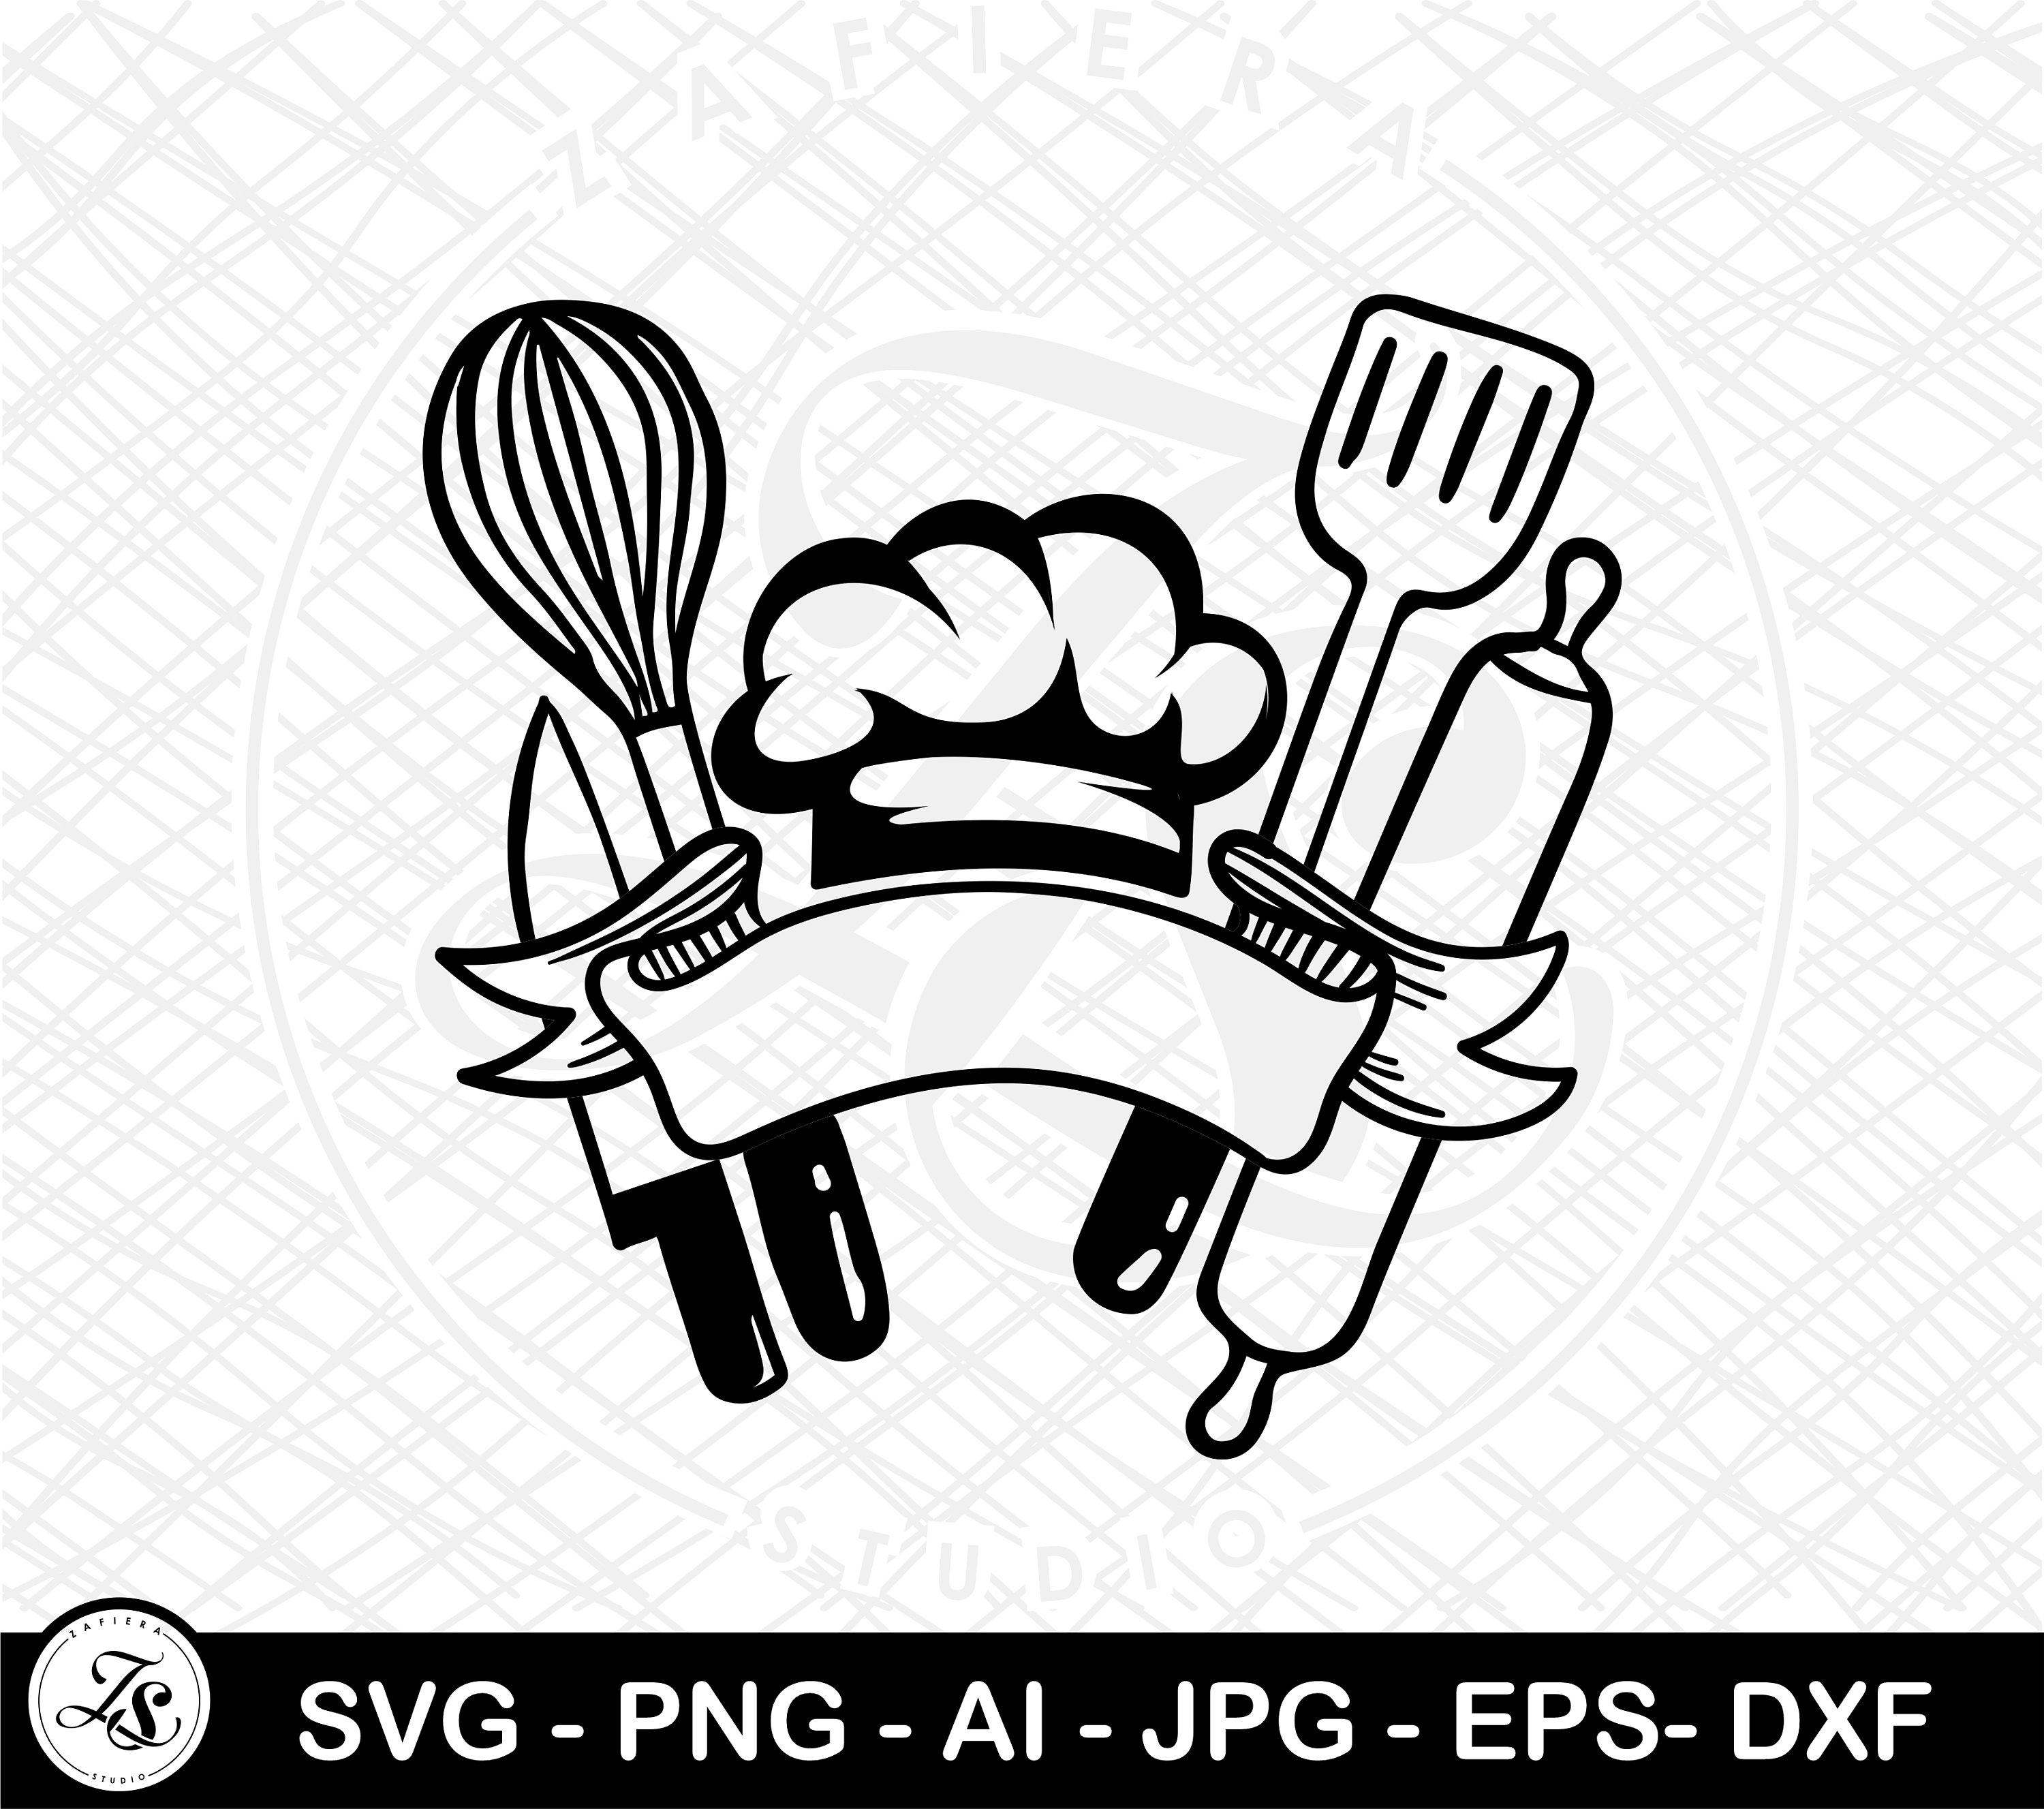 Chef And Many Tools For Cooking Royalty Free SVG, Cliparts